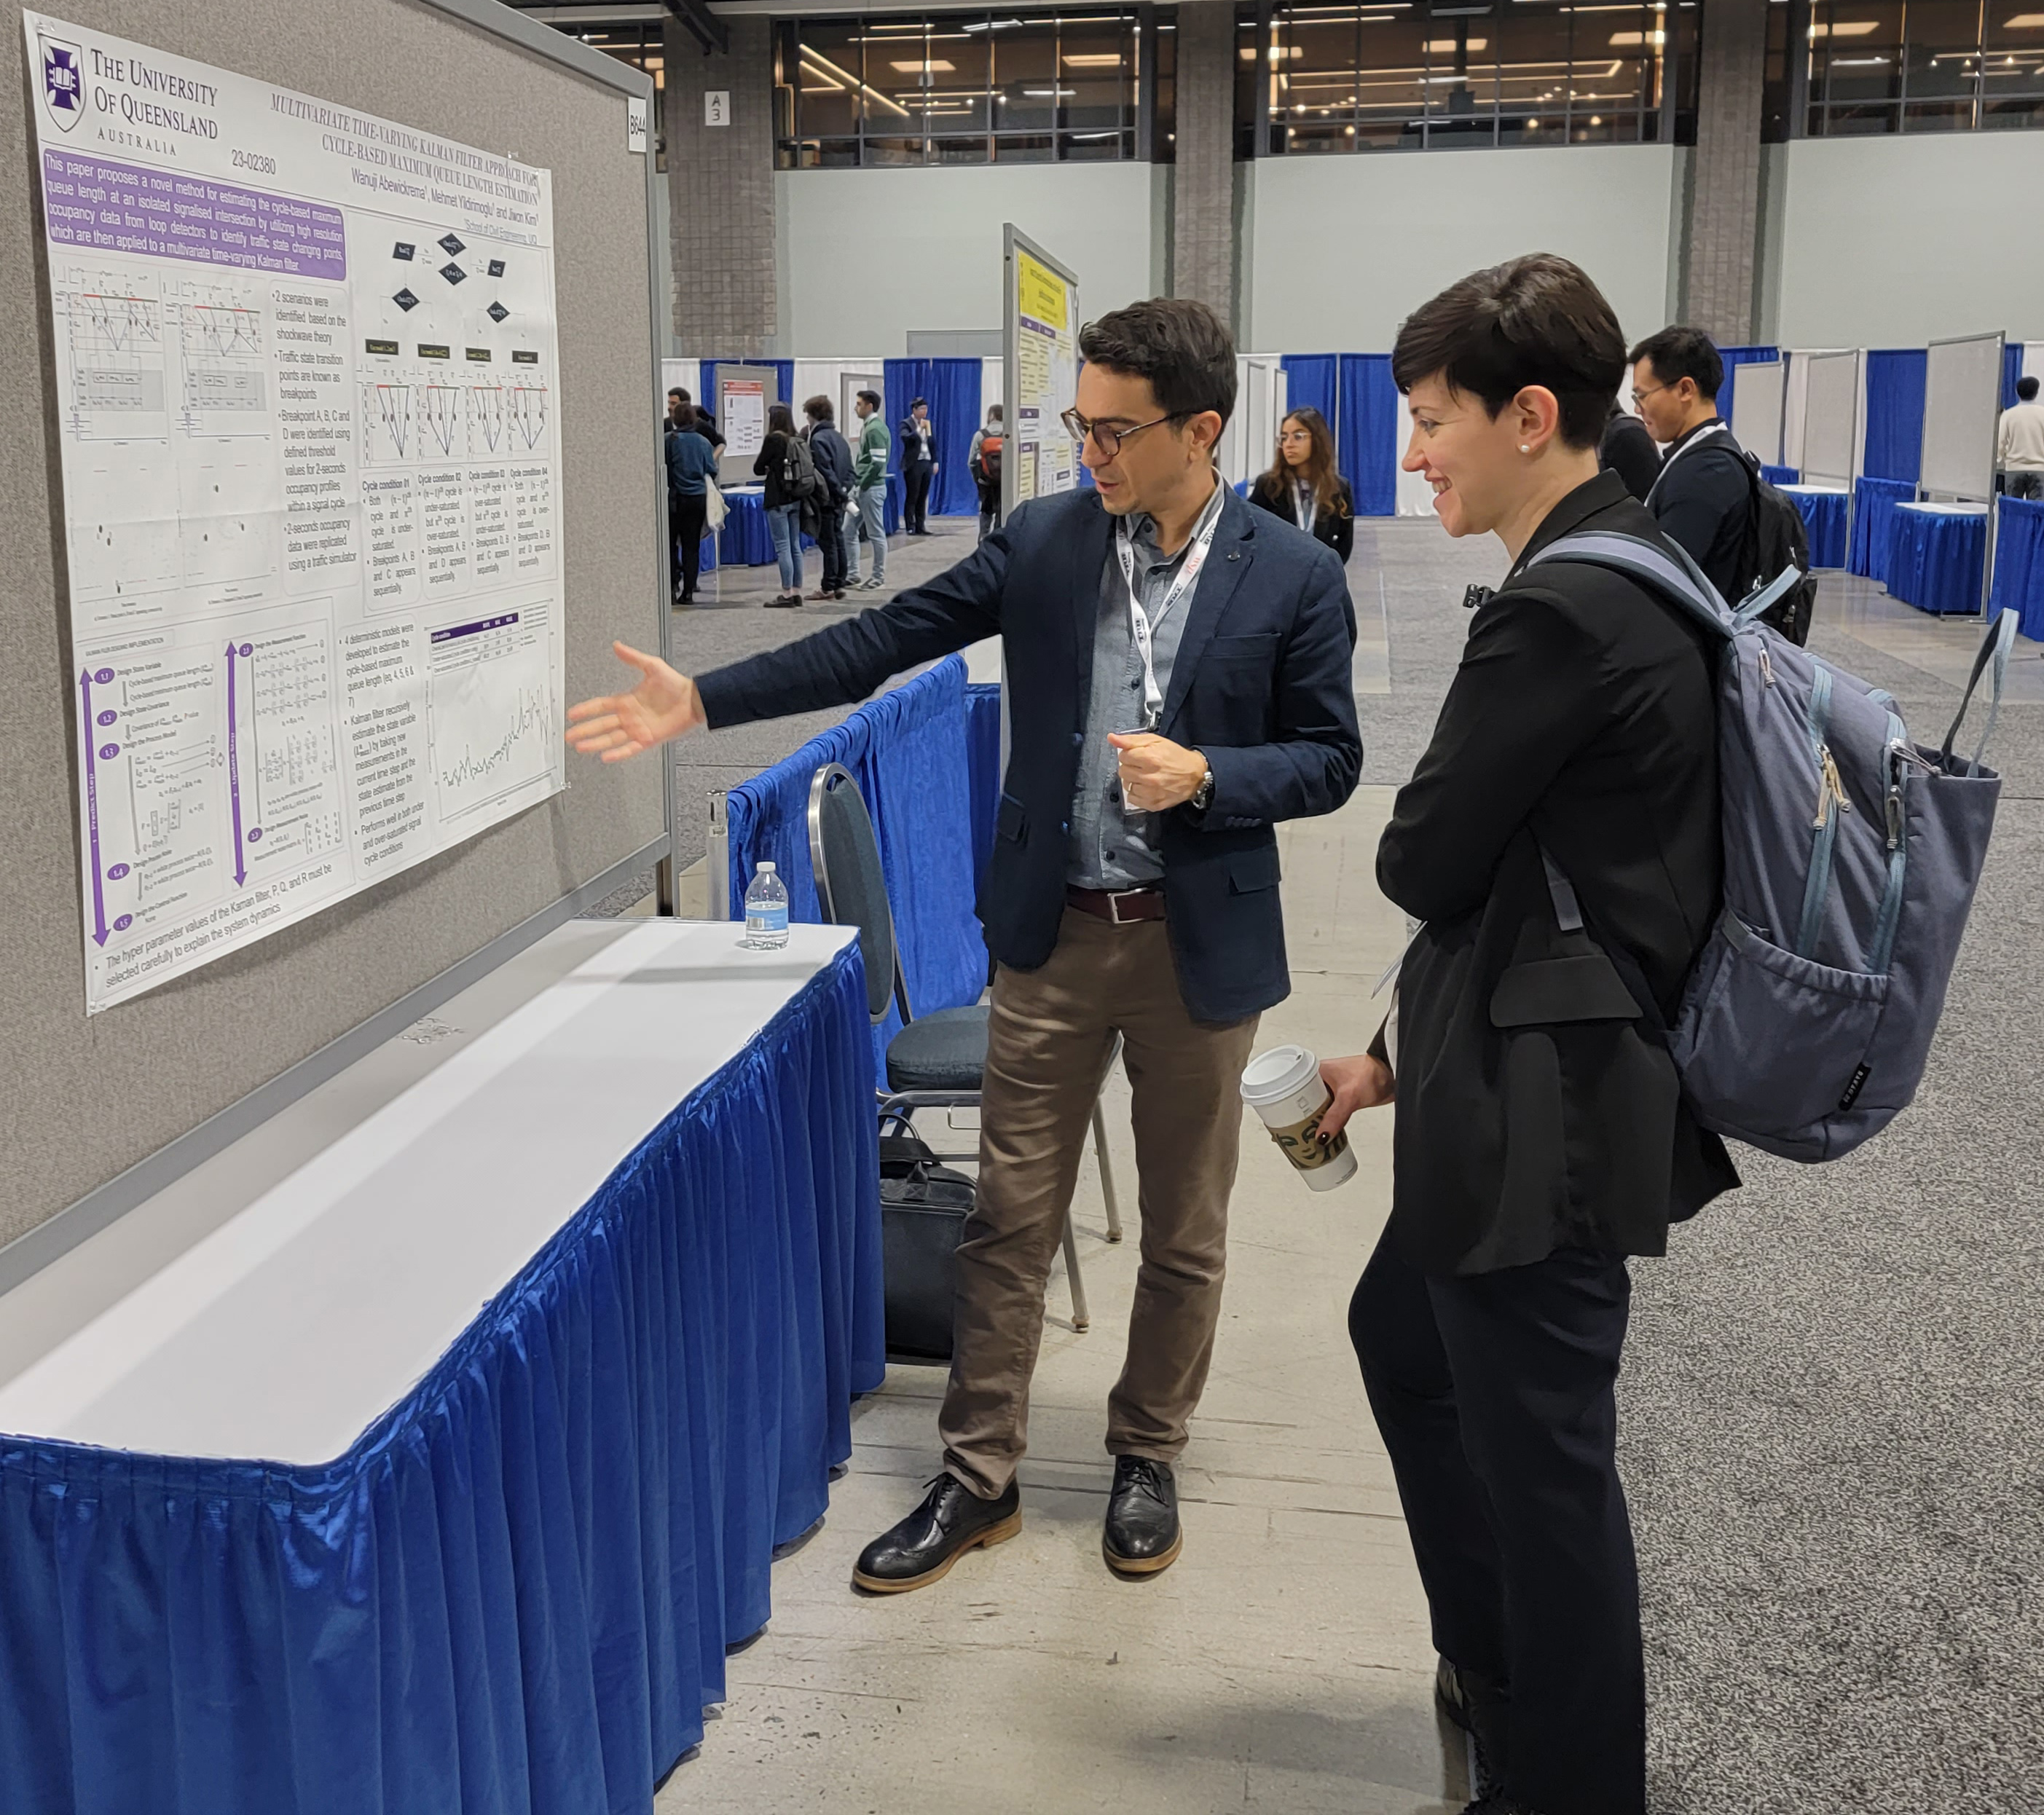 Civil and Environmental Engineering Professor Maria Laura Delle Monache presides at the Traffic Flow Theory, Part 4: Traffic Modeling, Monitoring, and Control session, checking out University of Queensland lecturer Mehmet Yoldirmoglu's poster